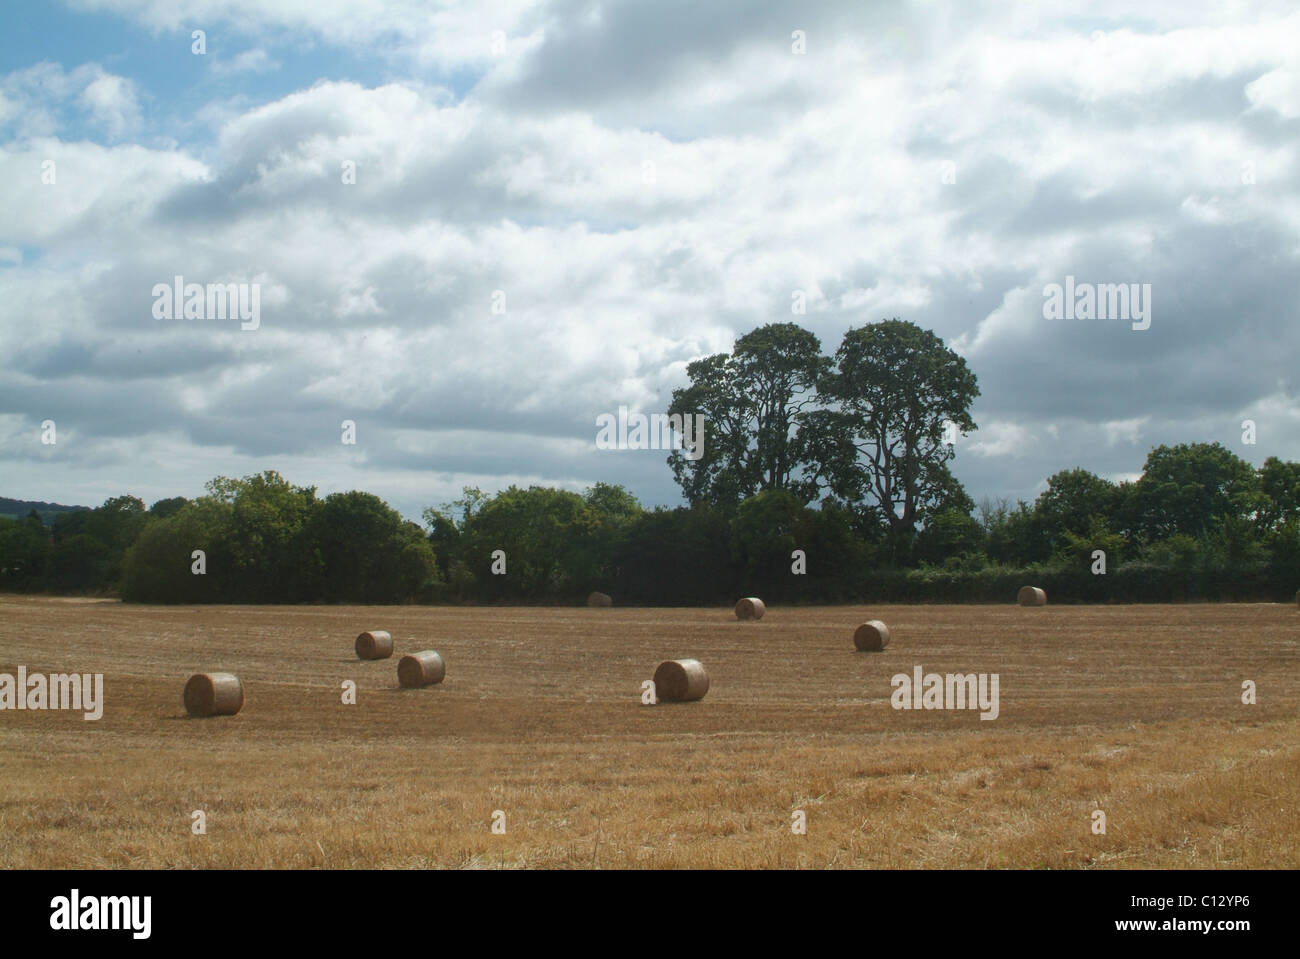 Straw bales harvested in a field Stock Photo